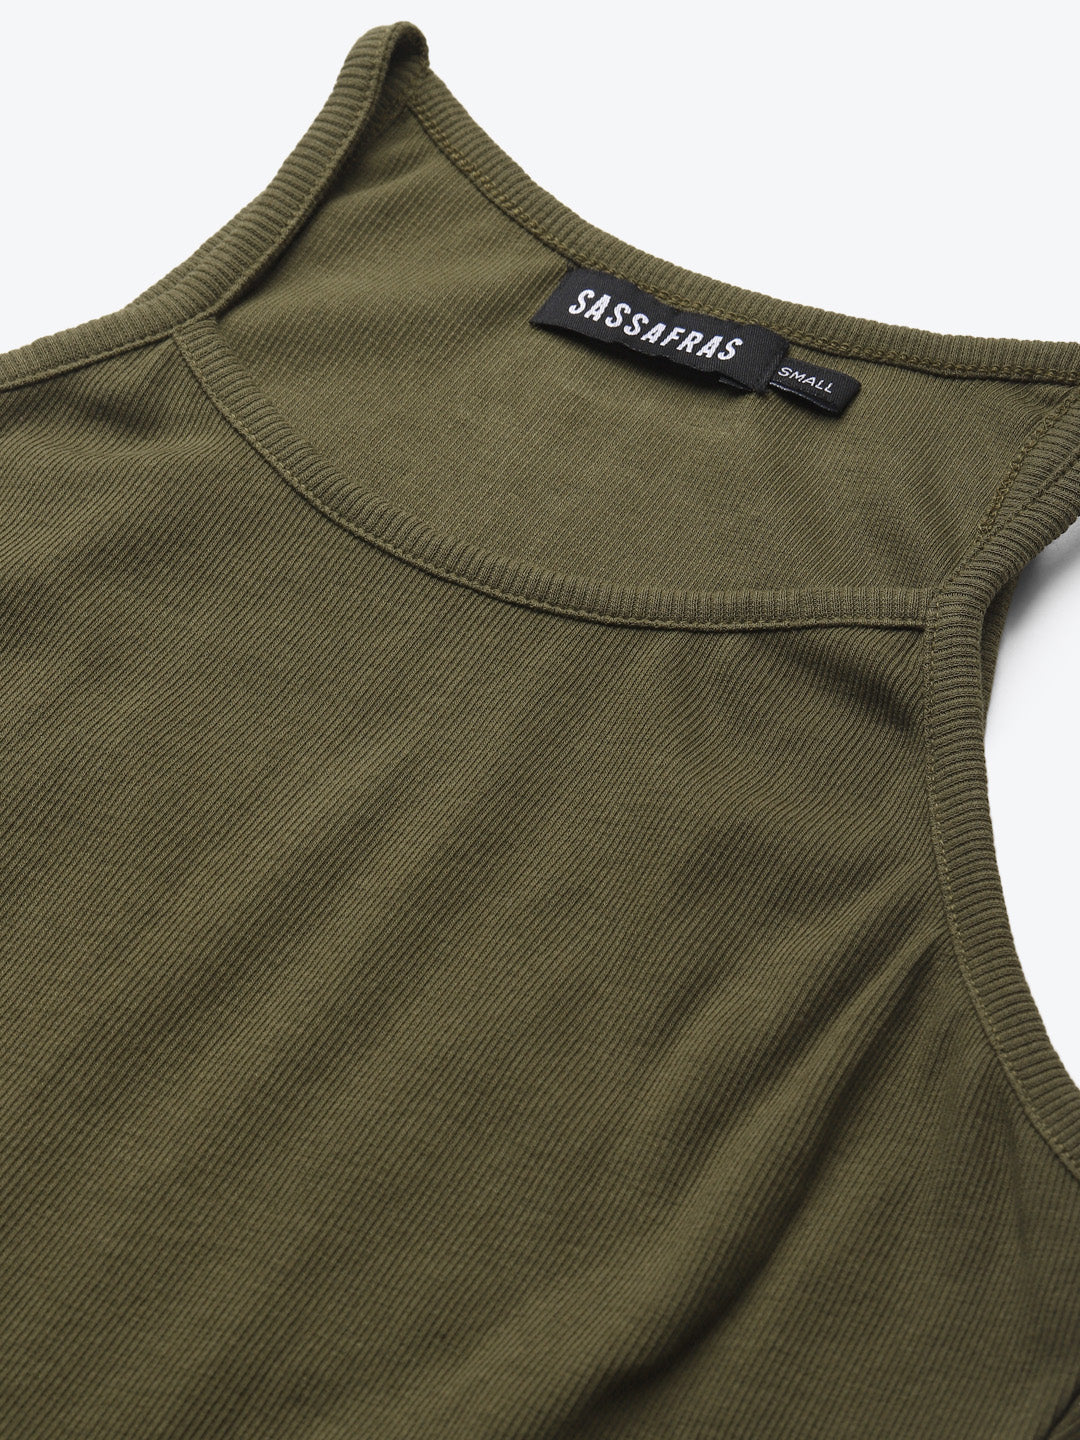 Olive Strappy Box Back Crop Top